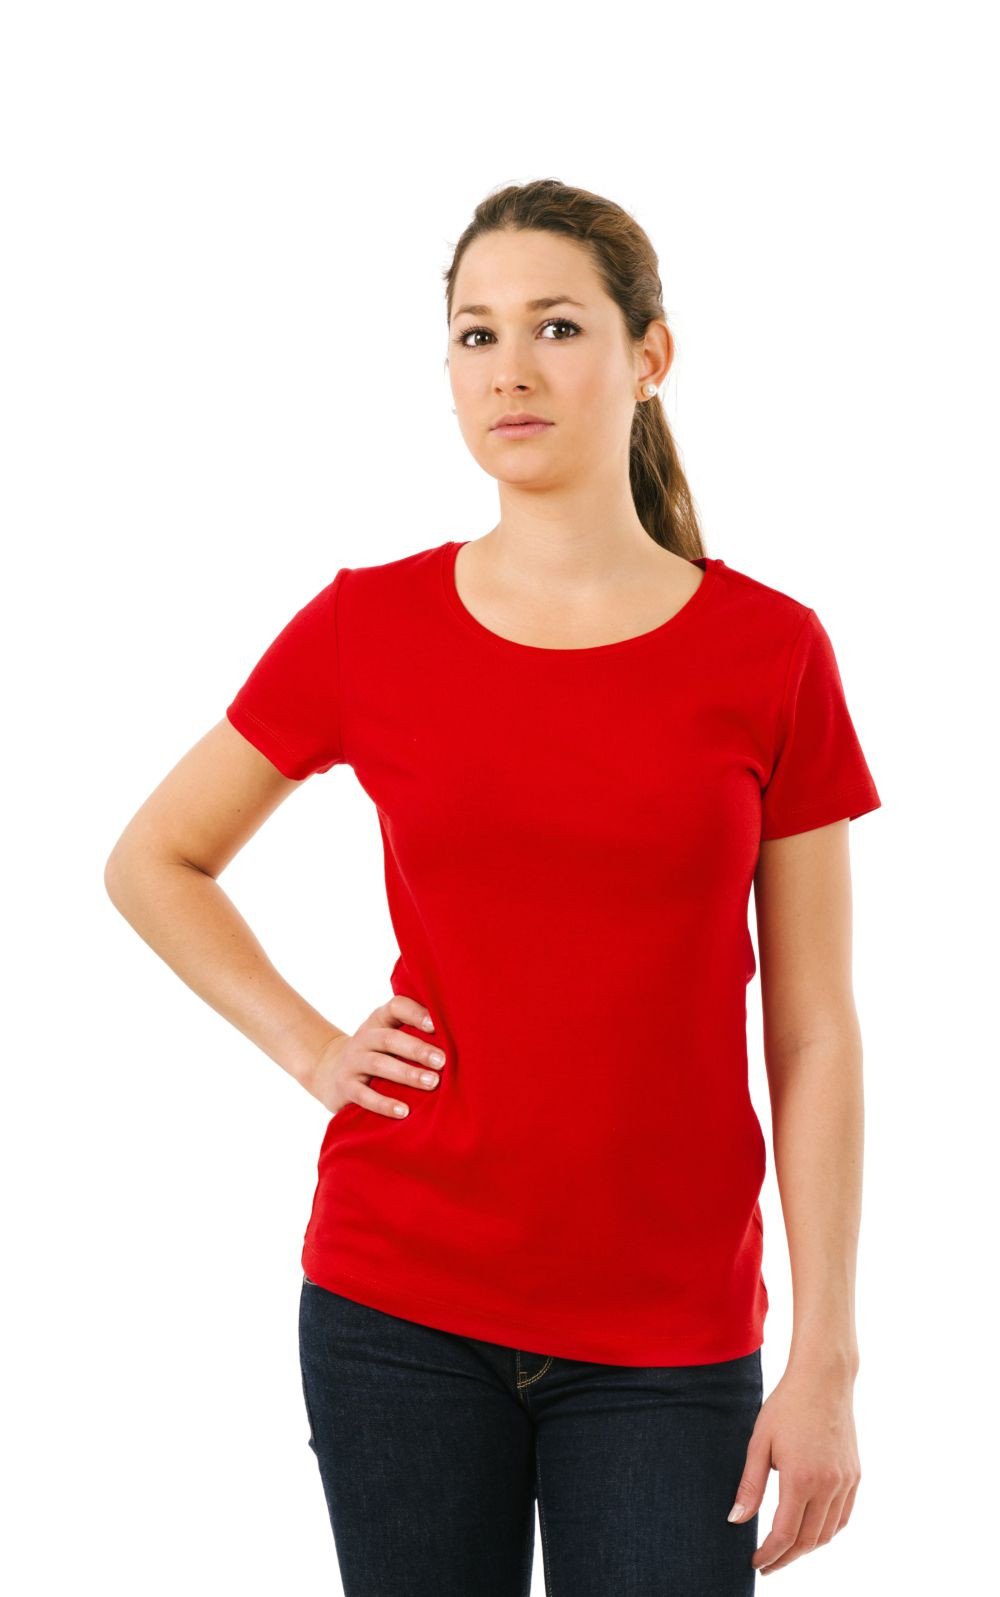 DOUBLE F ROUND NECK HALF SLEEVE RED COLOR PLAIN T-SHIRT FOR WOMEN